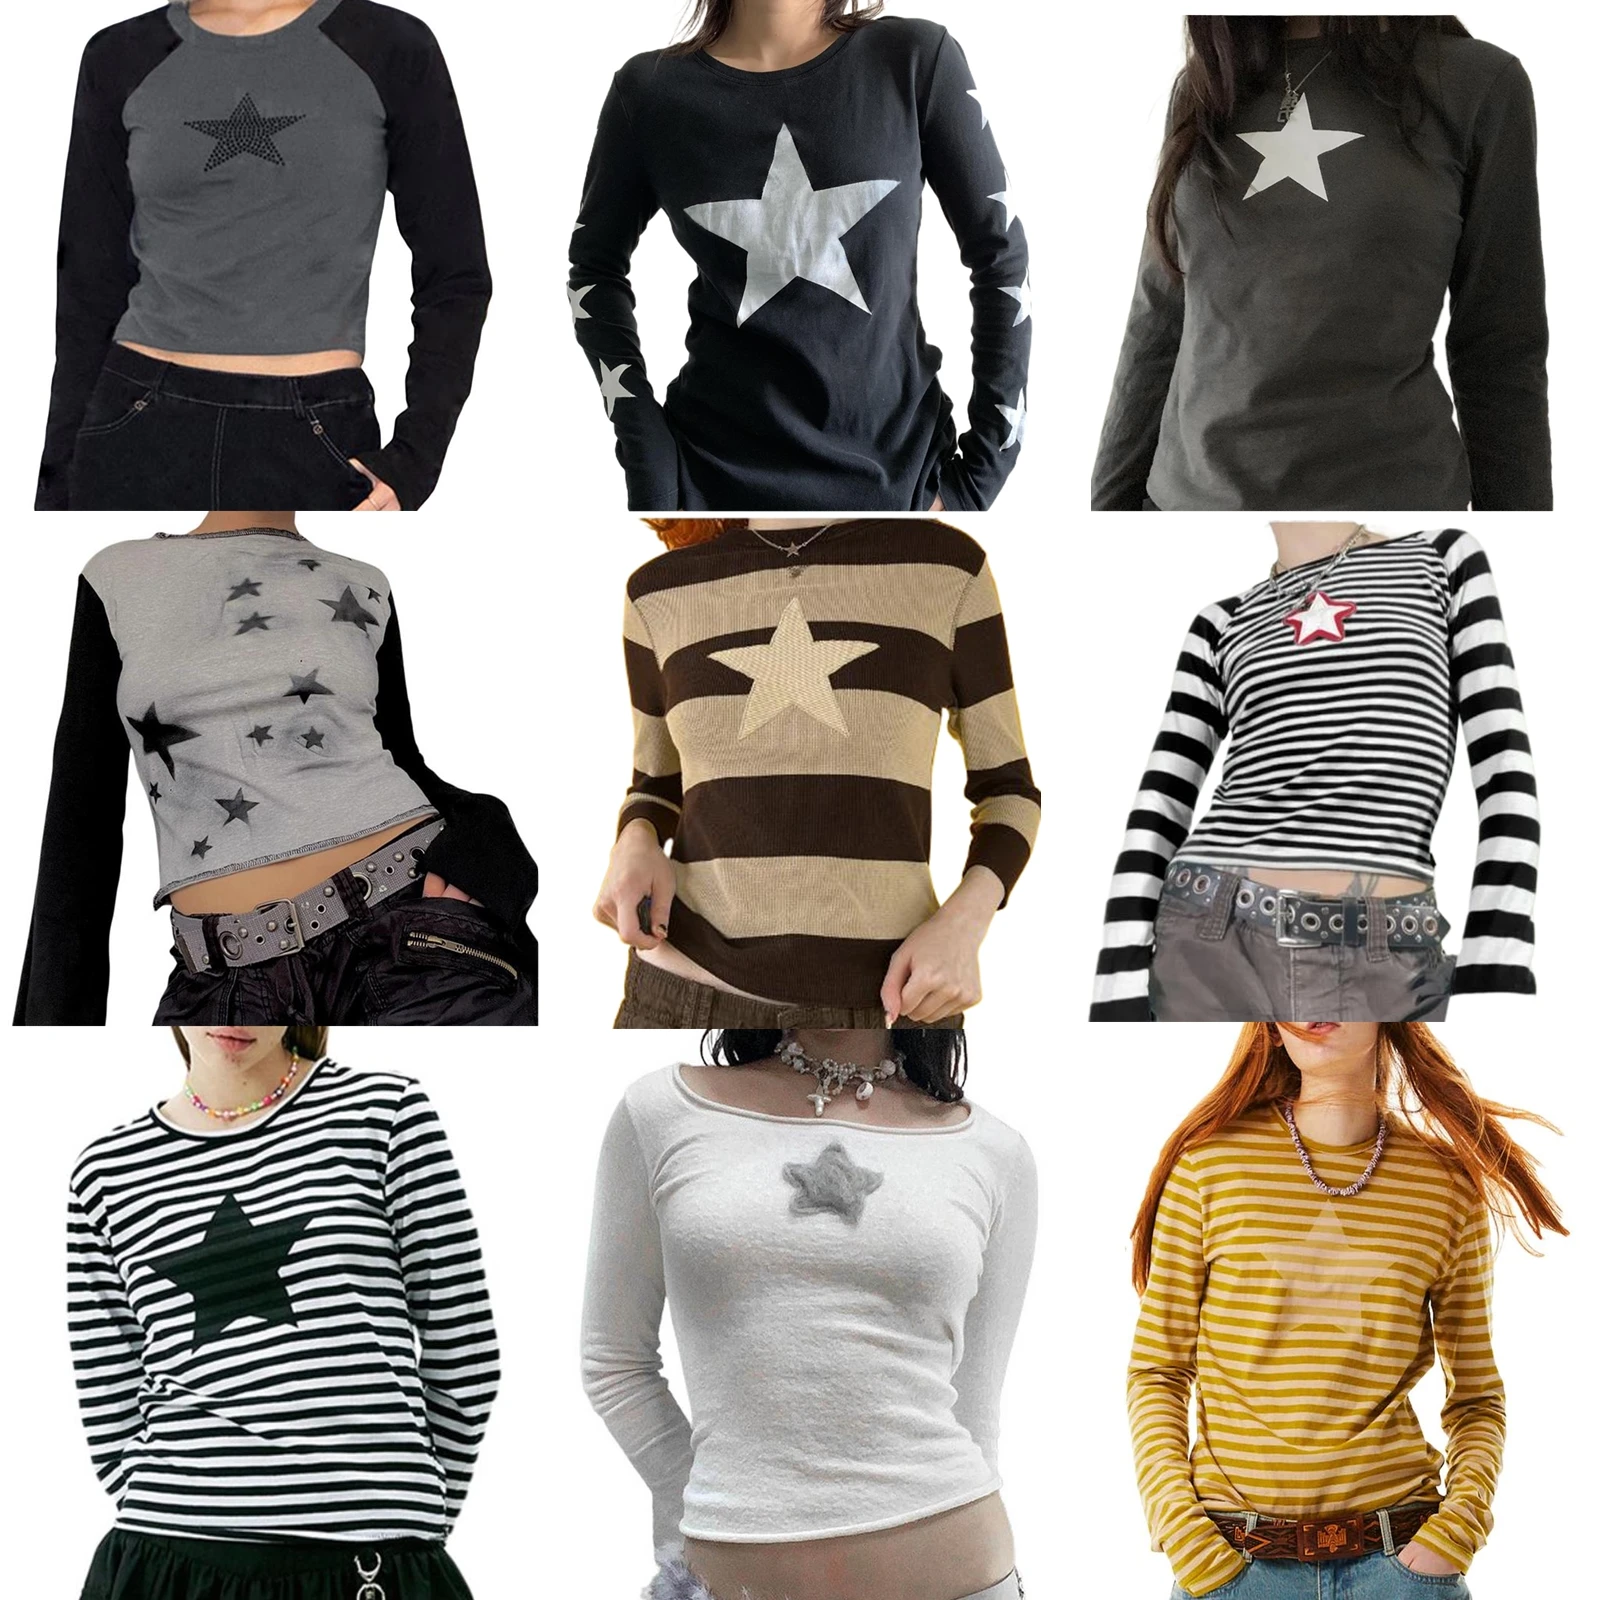 Dourbesty Y2k Long Sleeve Tops for Women Teens Goth Grunge Top Vintage Star Graphic Tee 90s 00s Fairy E-girl Aesthetic T-Shirts